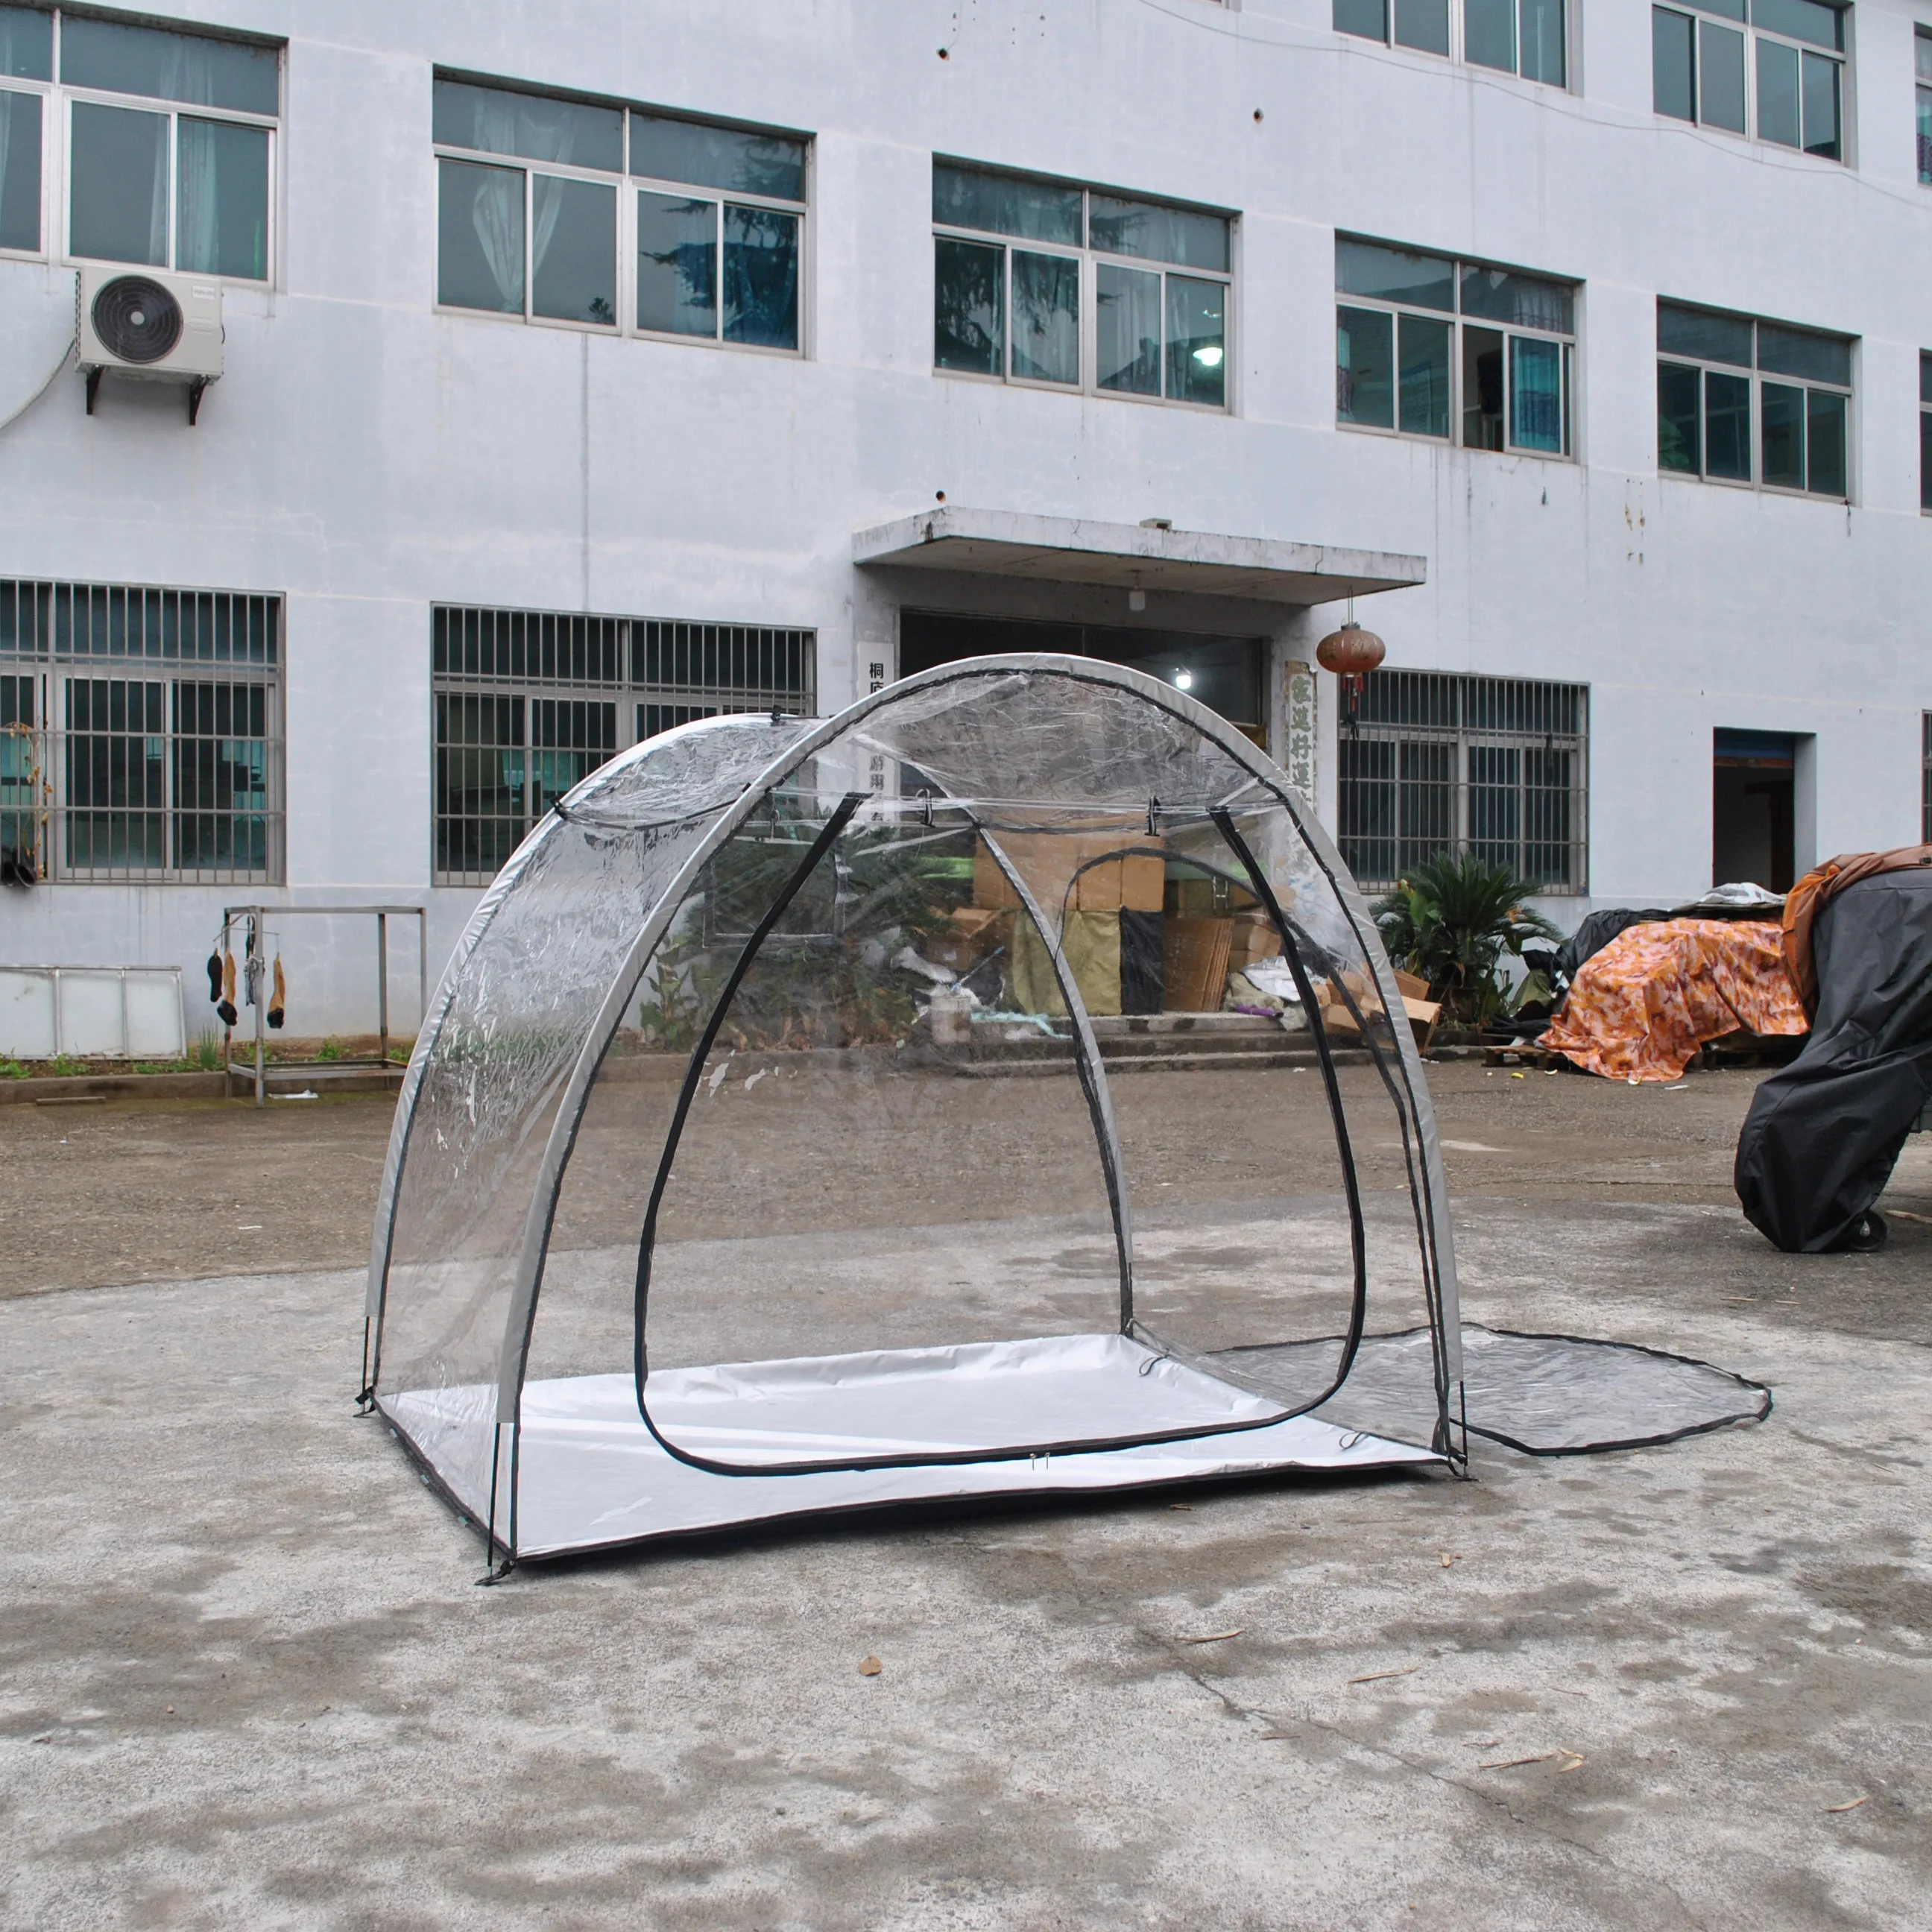 

Enlarge Widen Sunshine Leisure Tent PVC Transparent Flower House Plant Growing Room 2 Person Counrtyard Outdoor Camping Gazebo